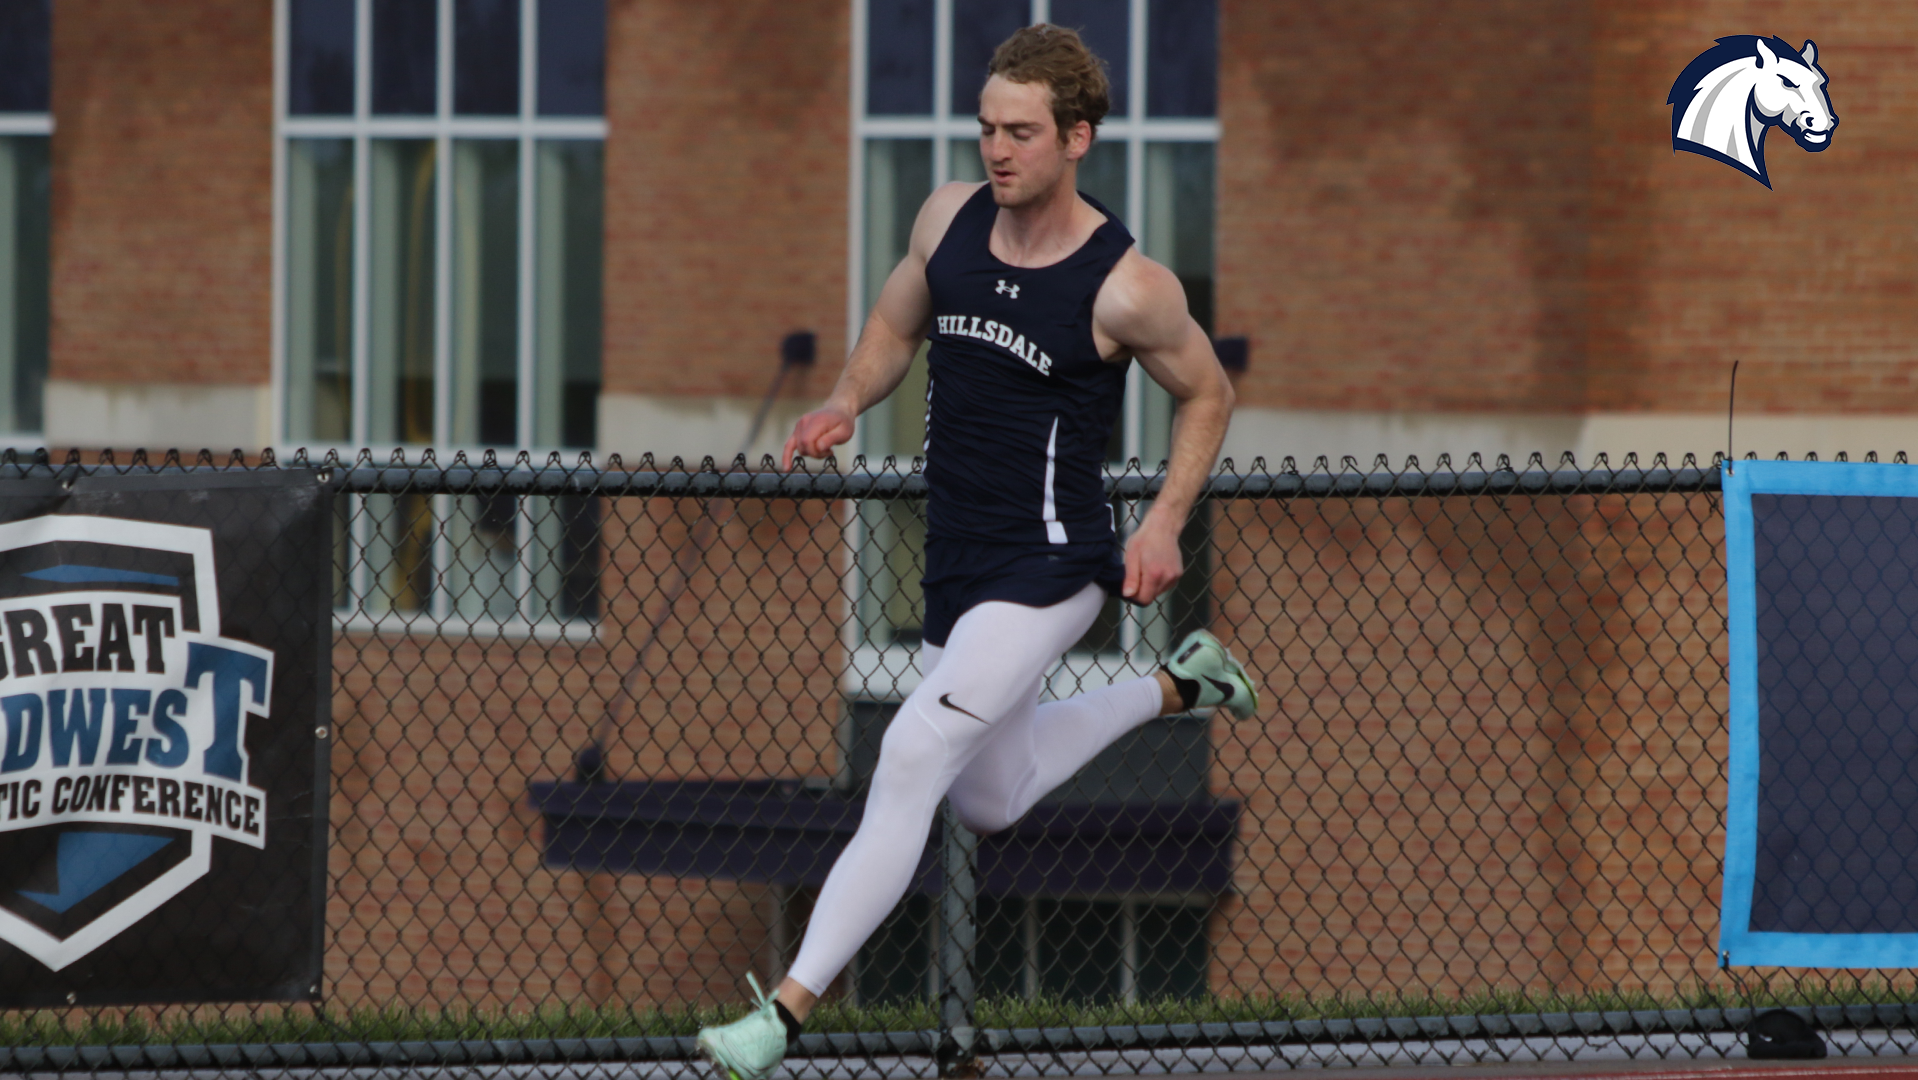 Chargers' Baldwin leads decathlon at the halfway mark as G-MAC Outdoor Championships get under way